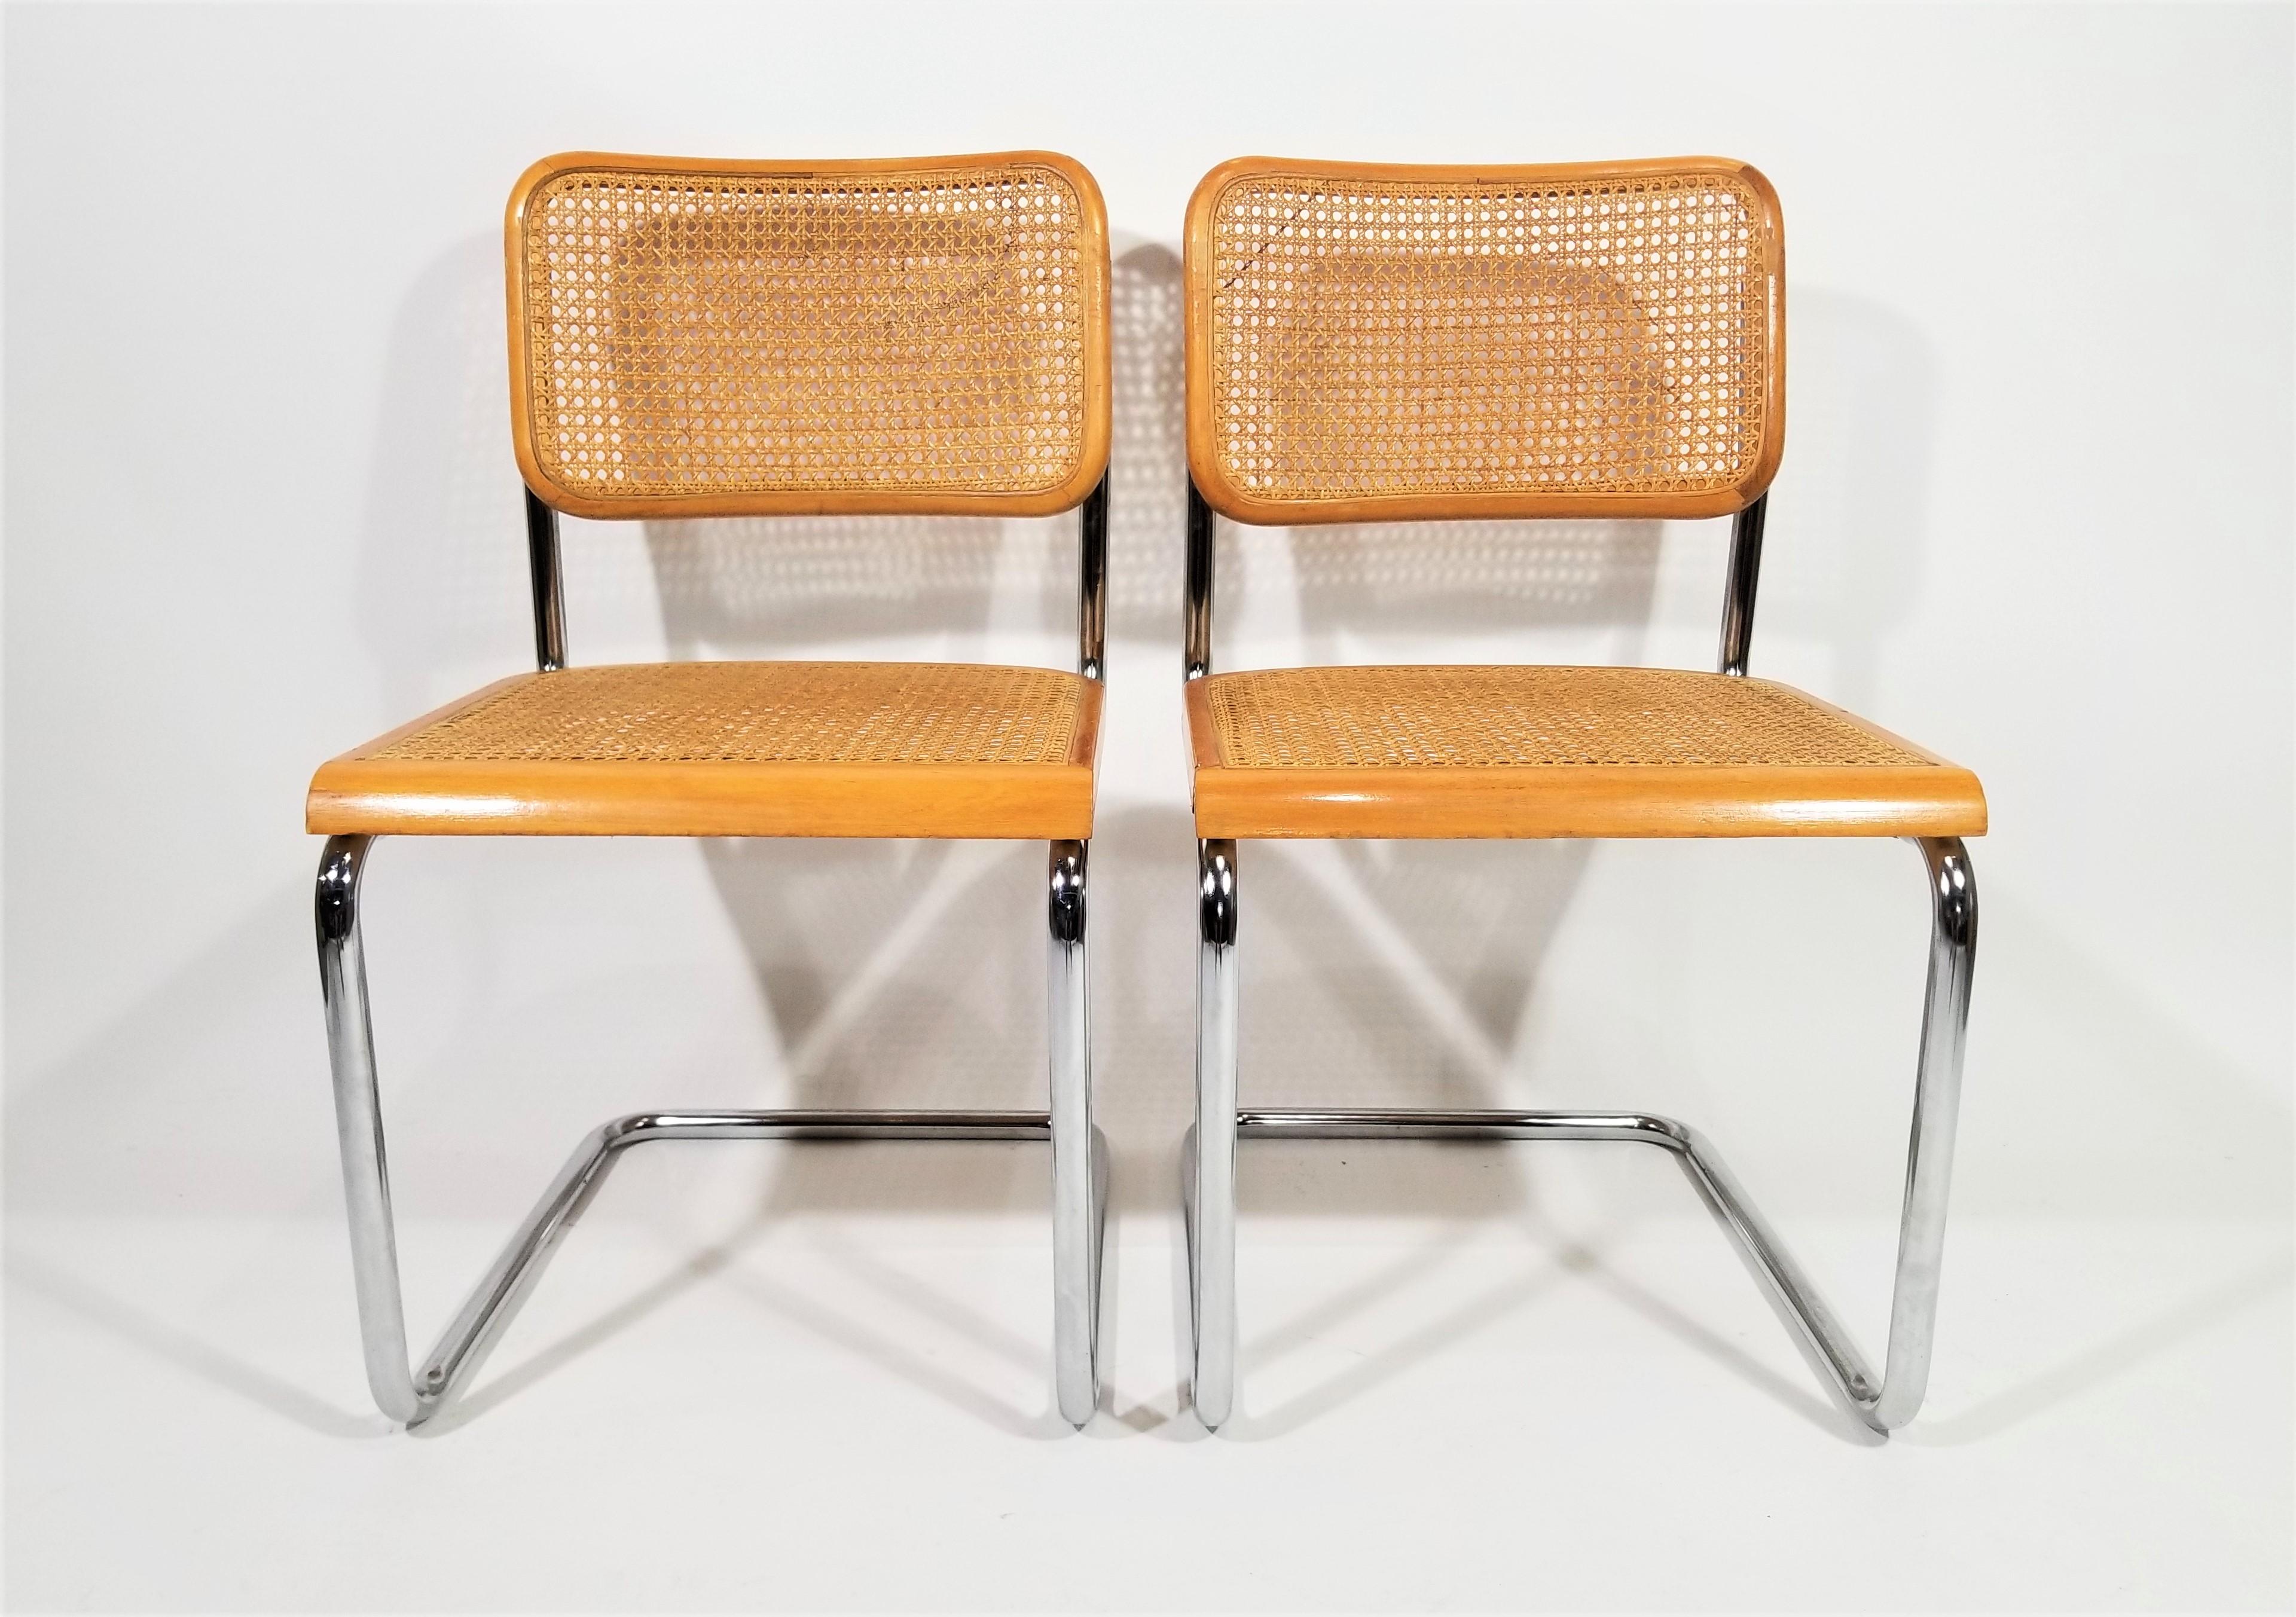  Marcel Breuer Cesca Chairs Mid Century Set of 4 For Sale 5